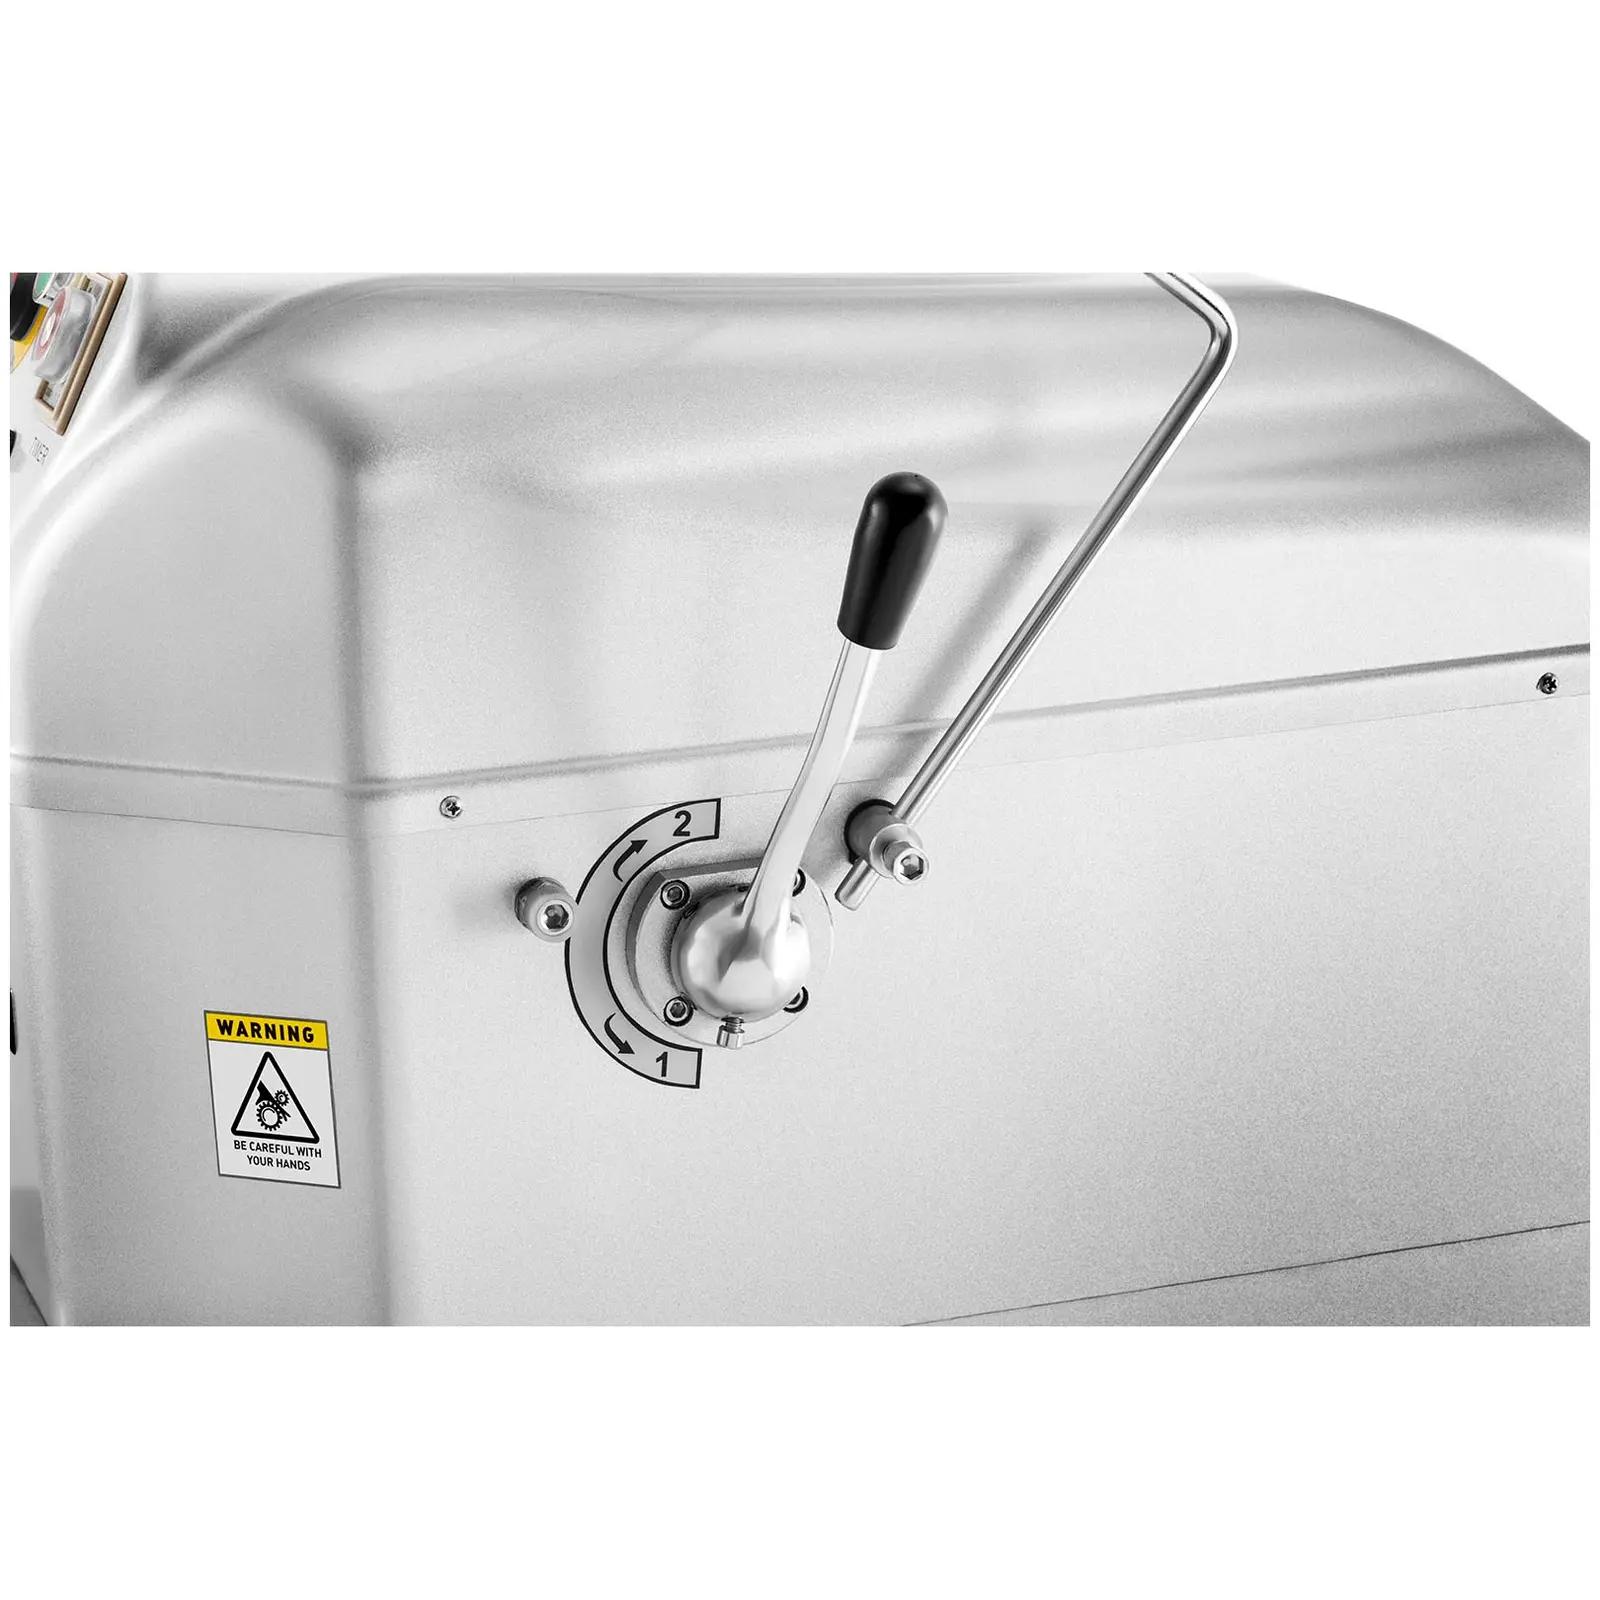 Batedeira profissional - 45 l - Royal Catering - 2100 W